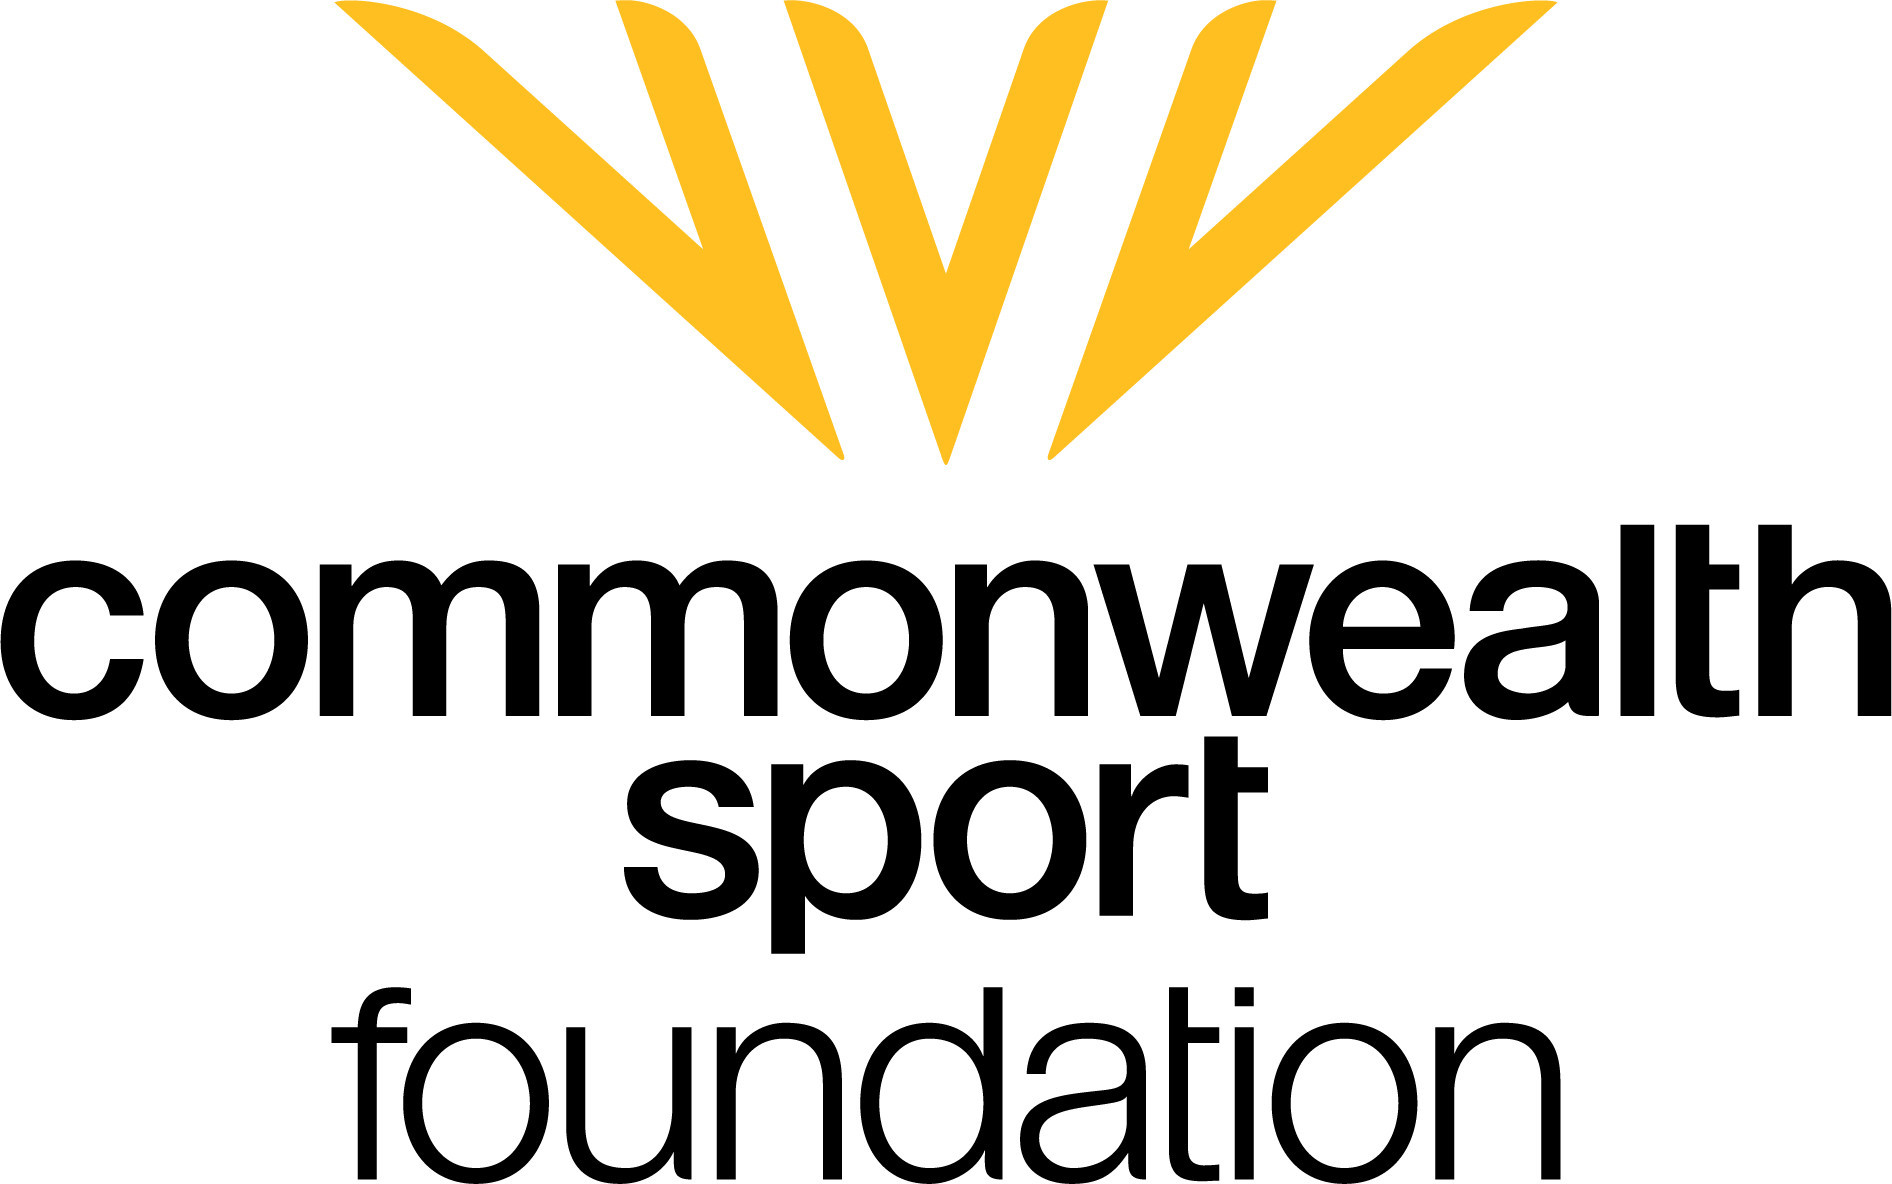 The CGF announced the launch of the Commonwealth Sport Foundation last year ©CGF